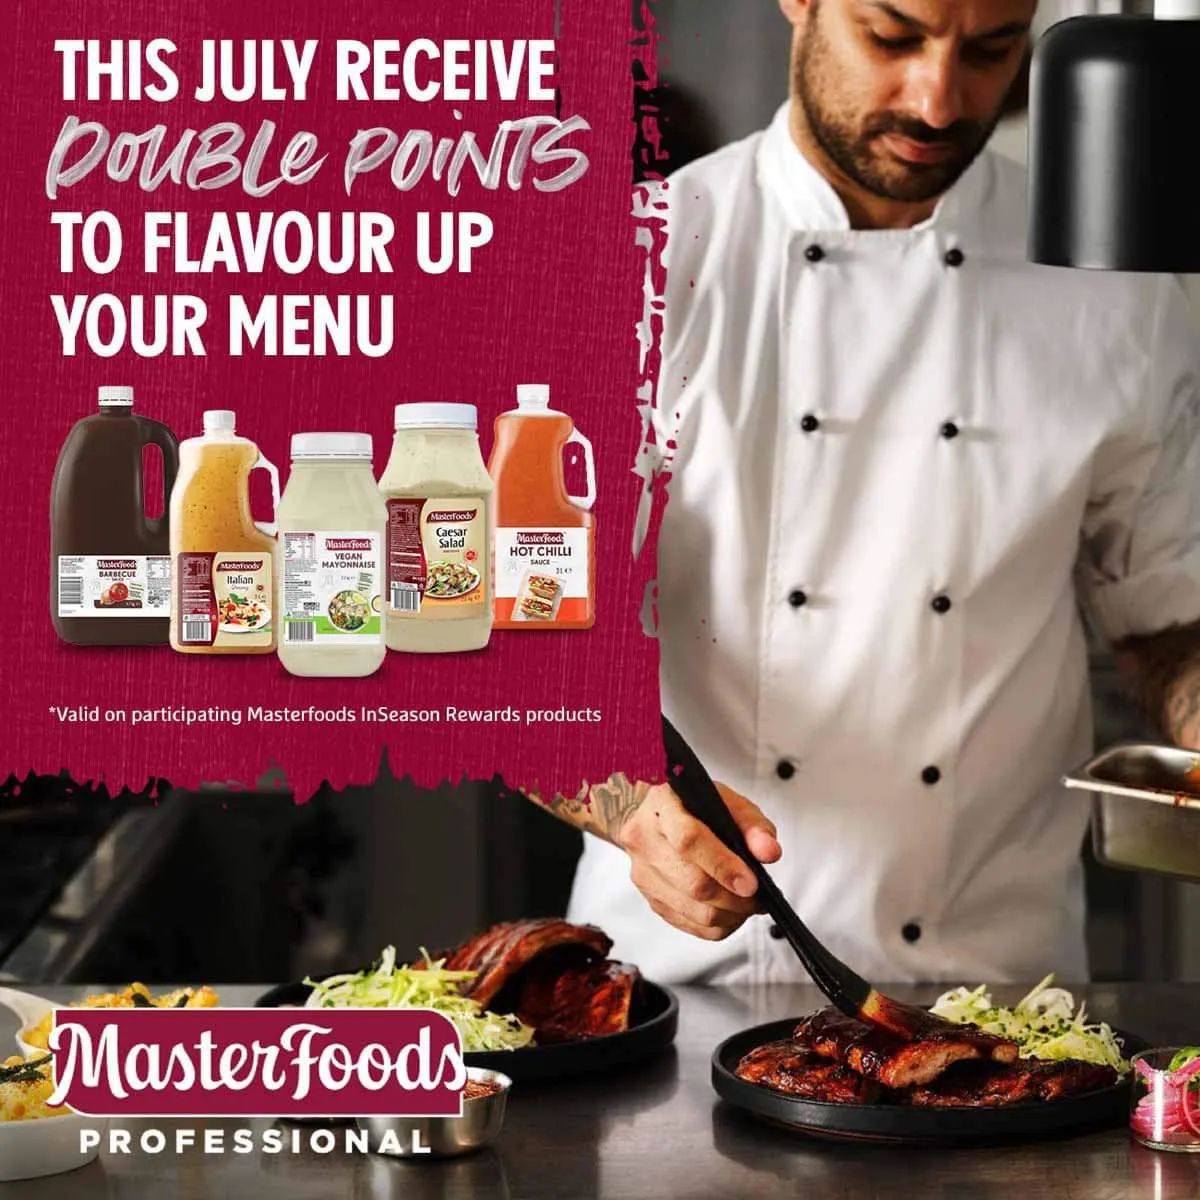 This July receive double points to flavour up your menu with participating InSeason Rewards Masterfoods Products!

To view participating products please click on the below link:
https://www.whatsinseason.com.au/

If you need any help or assistance with creating an account please let your Del-Re Representative know.

To view our Monthly Brochure please click on the below link:
https://delrenational.com.au/brochures/

#delrenational #delrenationalfoodgroup #foodservice #familyowned @masterfoods